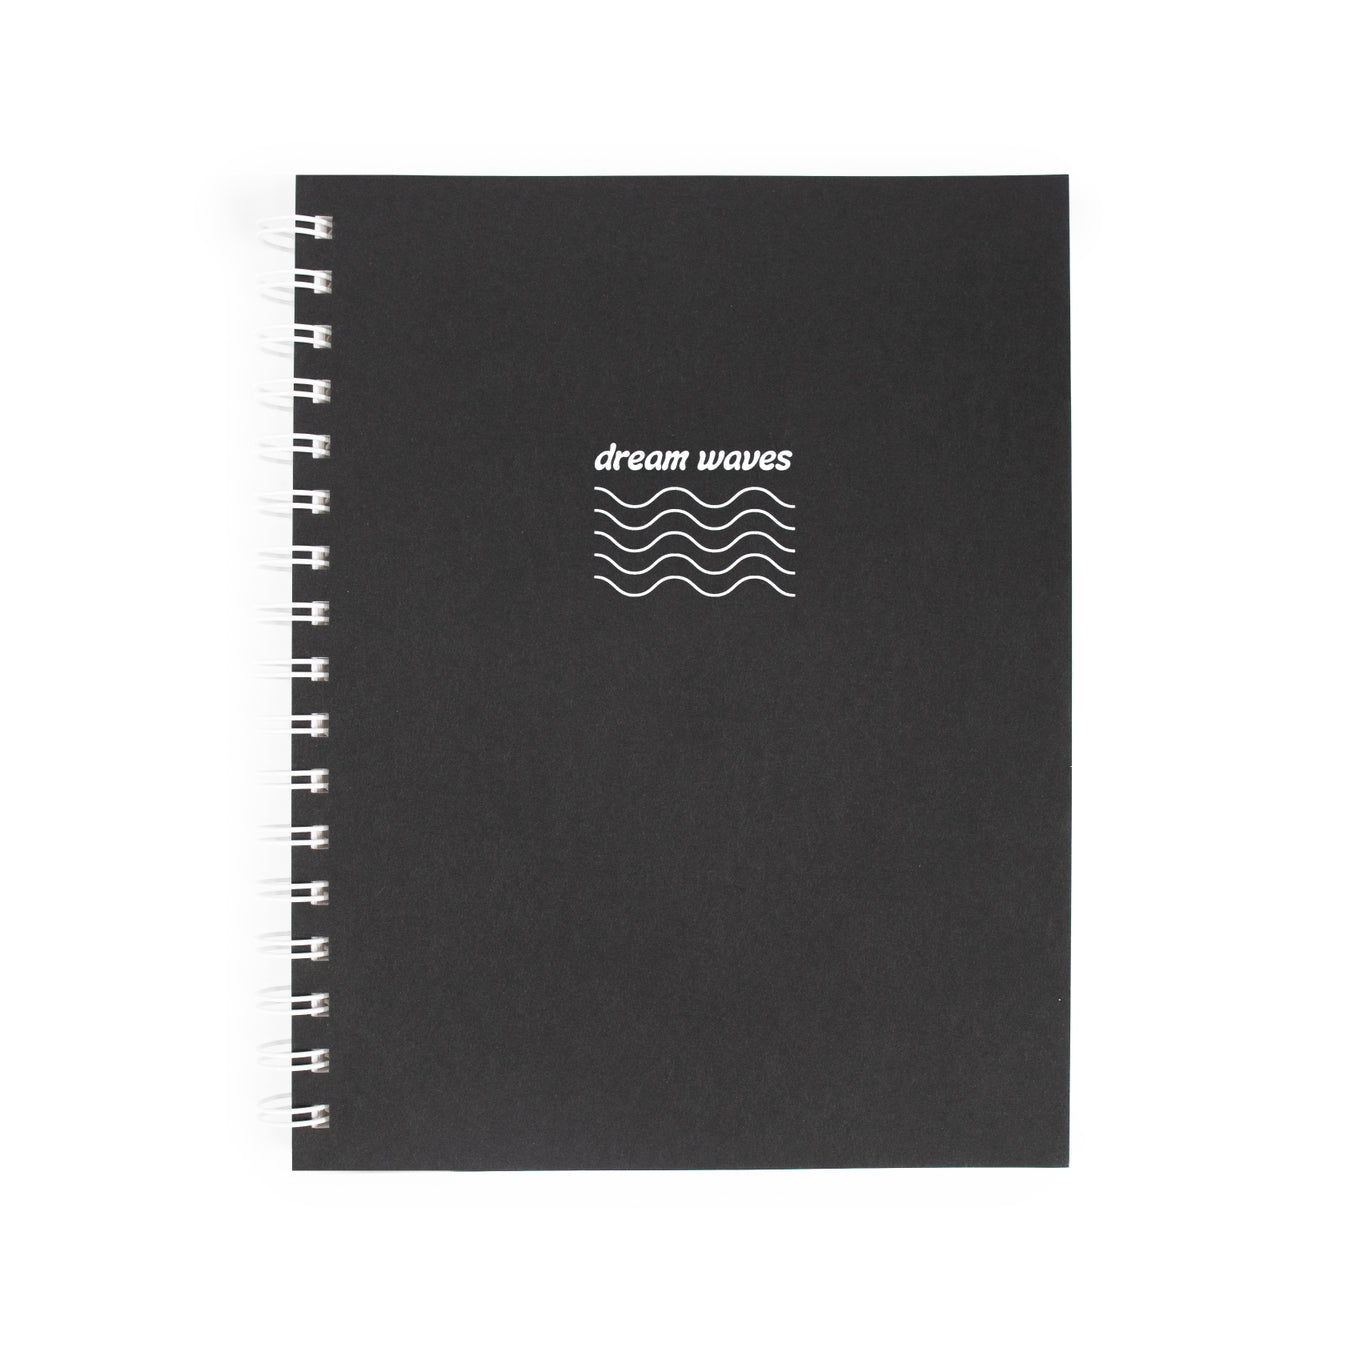 The Dream Waves Journal: guided pages for recording and reflecting on your dreams. Bringing curiosity and attention to our dreams can put us in touch with intuition, wisdom and the subconscious mind. This journal is just one tool to help you move intentionally along your waking journey.